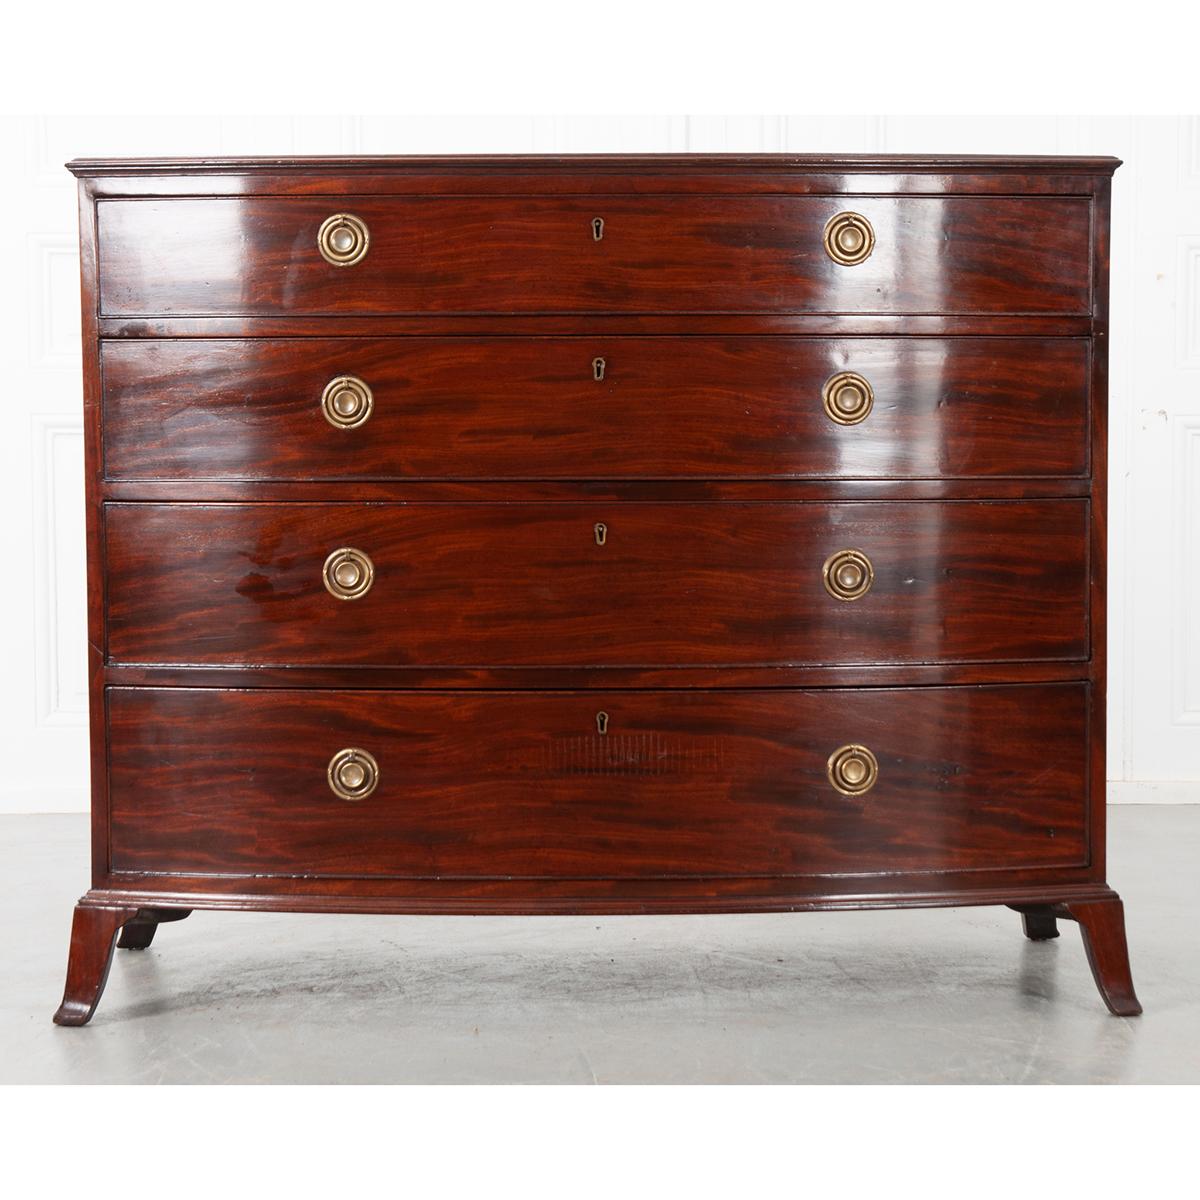 This is a lovely English 18th century mahogany chest with a bow front. It has a wonderful patina from years of loving care and use. The top sits over four drawers with two round brass pulls on each drawer. All sit atop four splayed legs. Circa